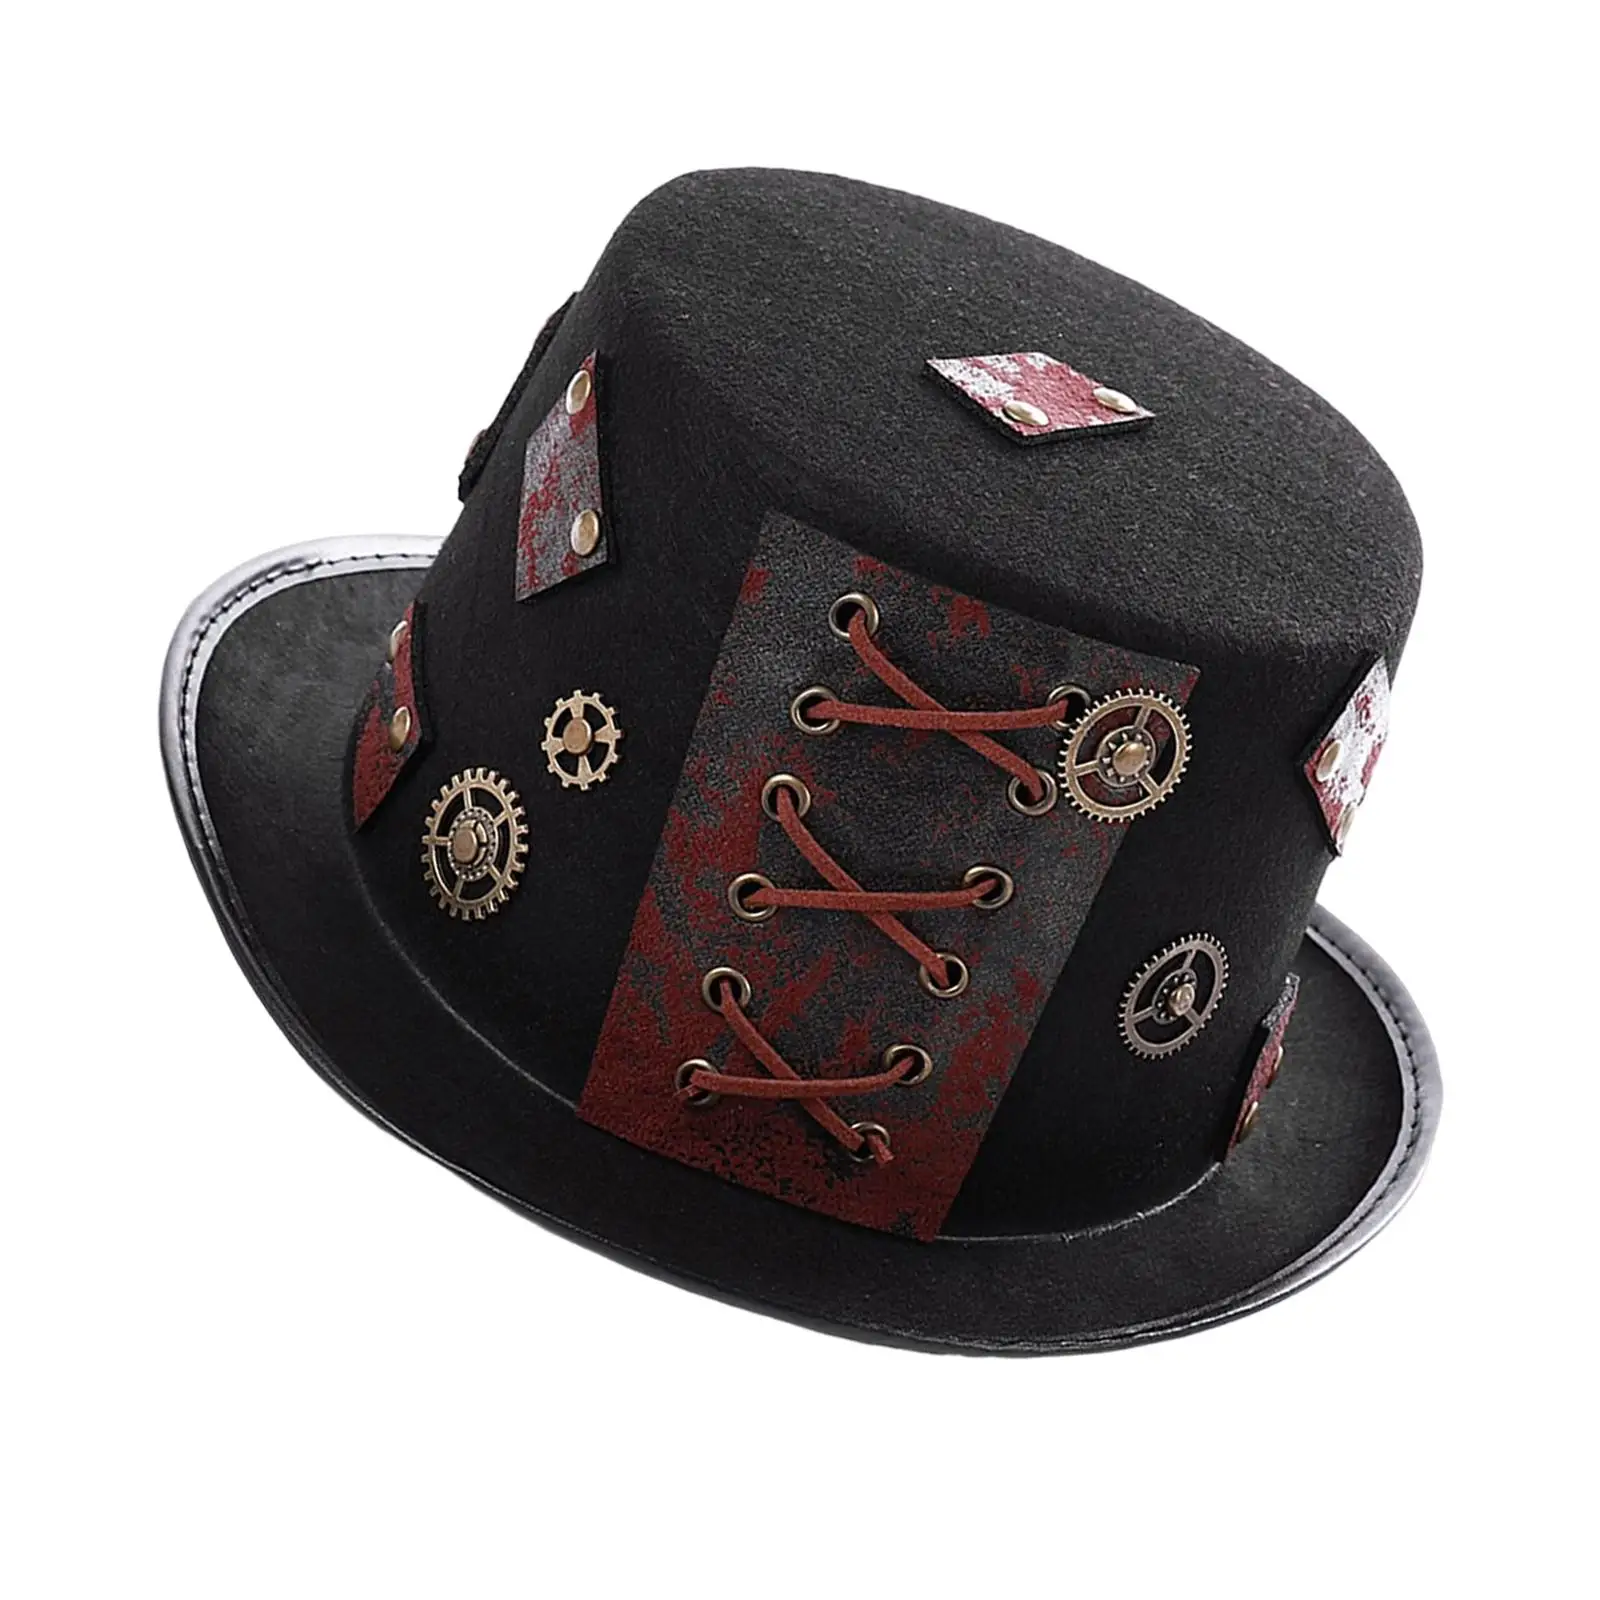 Retro Goth Steampunk Top Hat with String Gear Cosplay Costume Hat, Accessory Black Industrial Age Halloween Head Wear Unisex